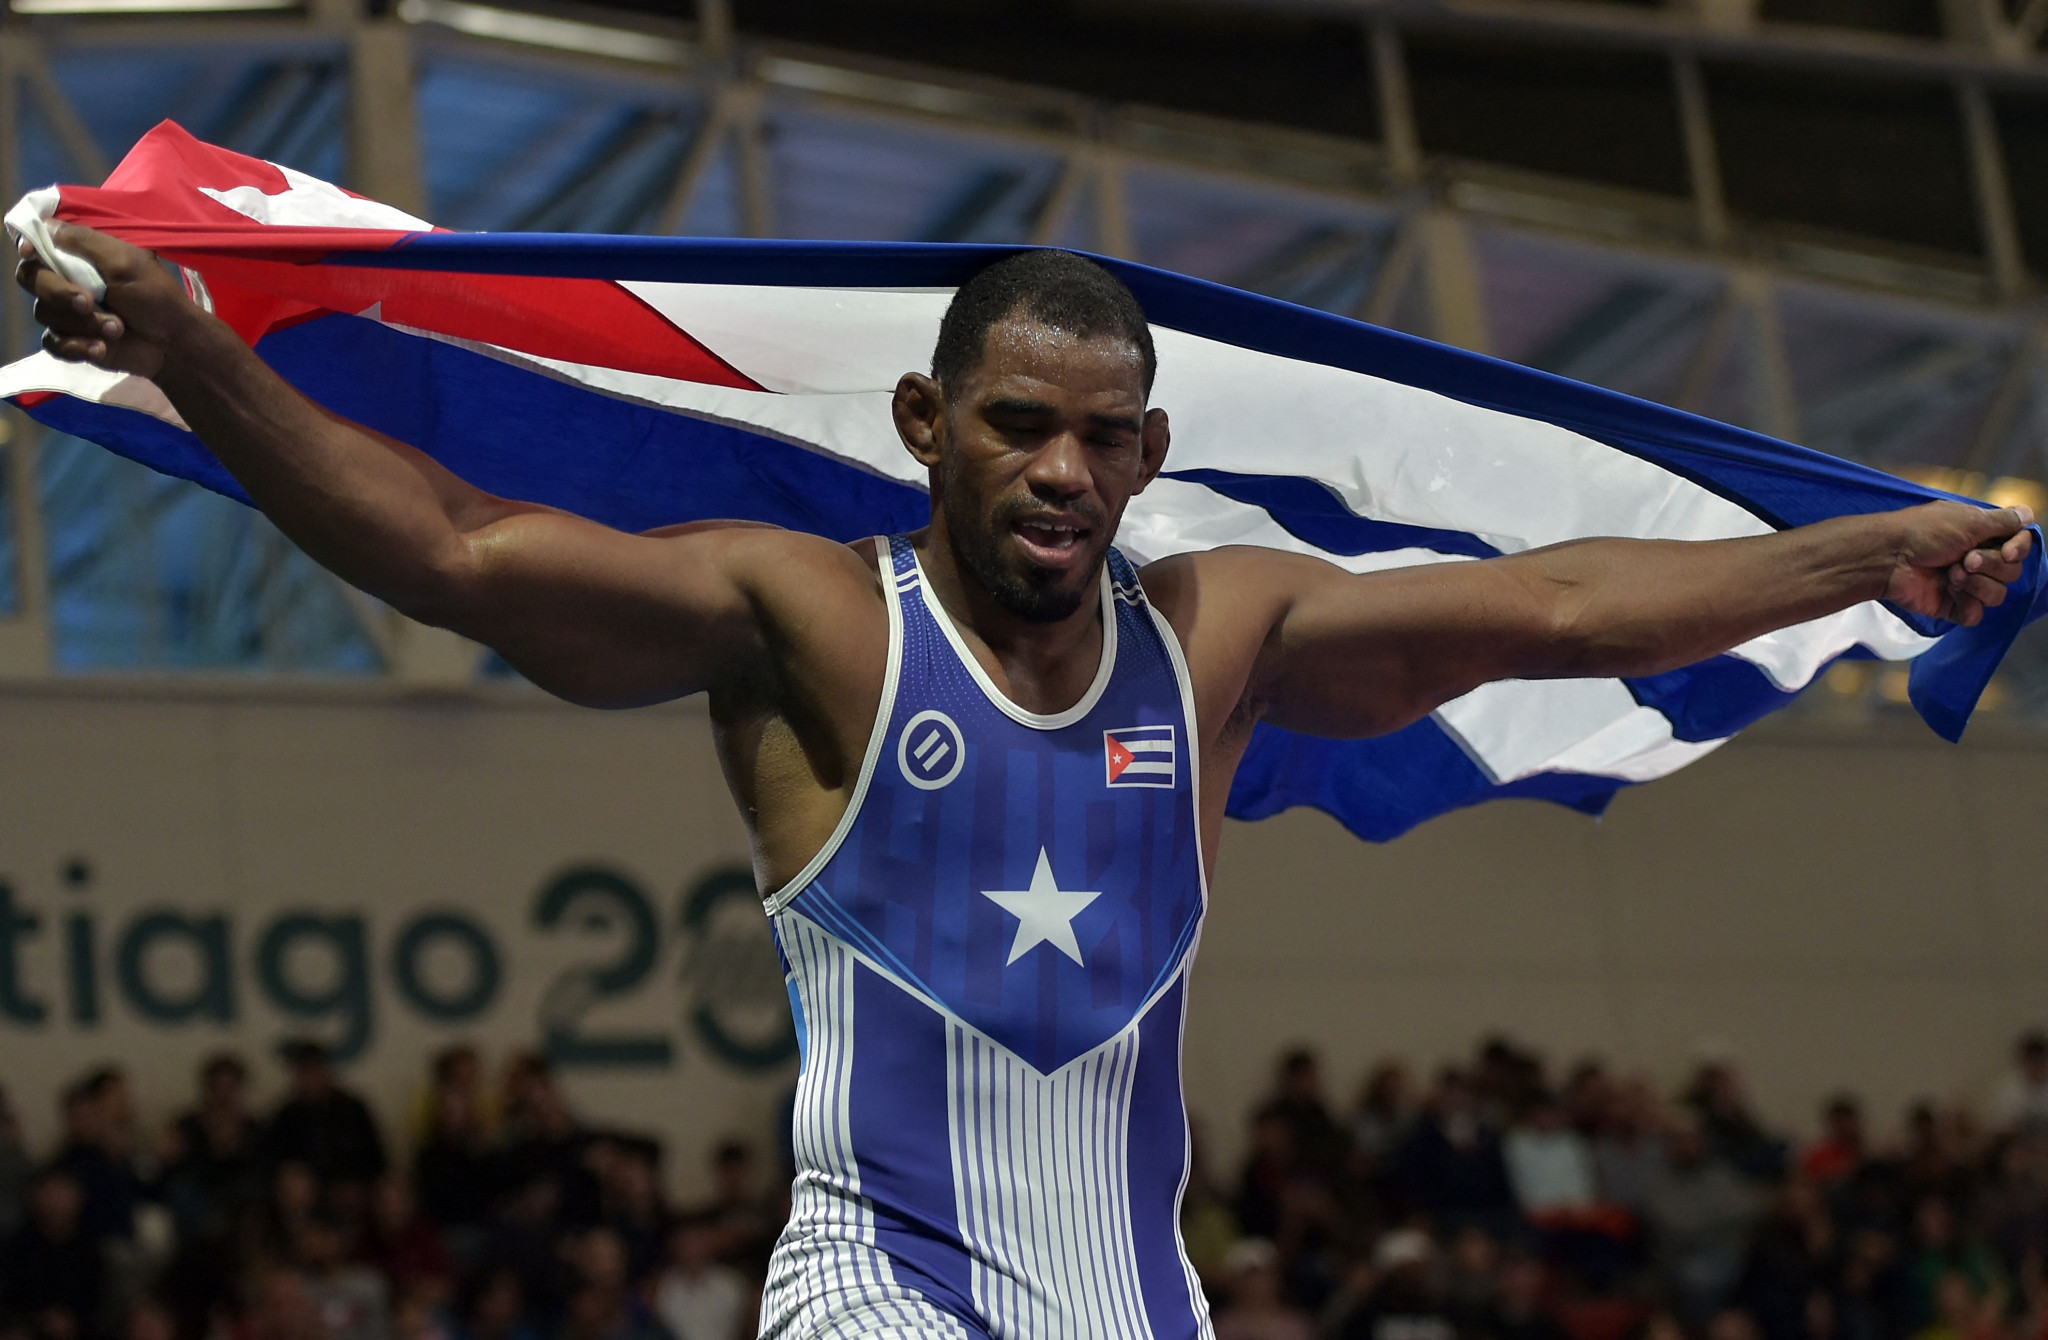 Cuba's Yurieski Torreblanca celebrates after defeating US' Mark Hall II in the wrestling men's freestyle 86kg gold medal bout during the Pan American Games Santiago 2023 © Getty Images